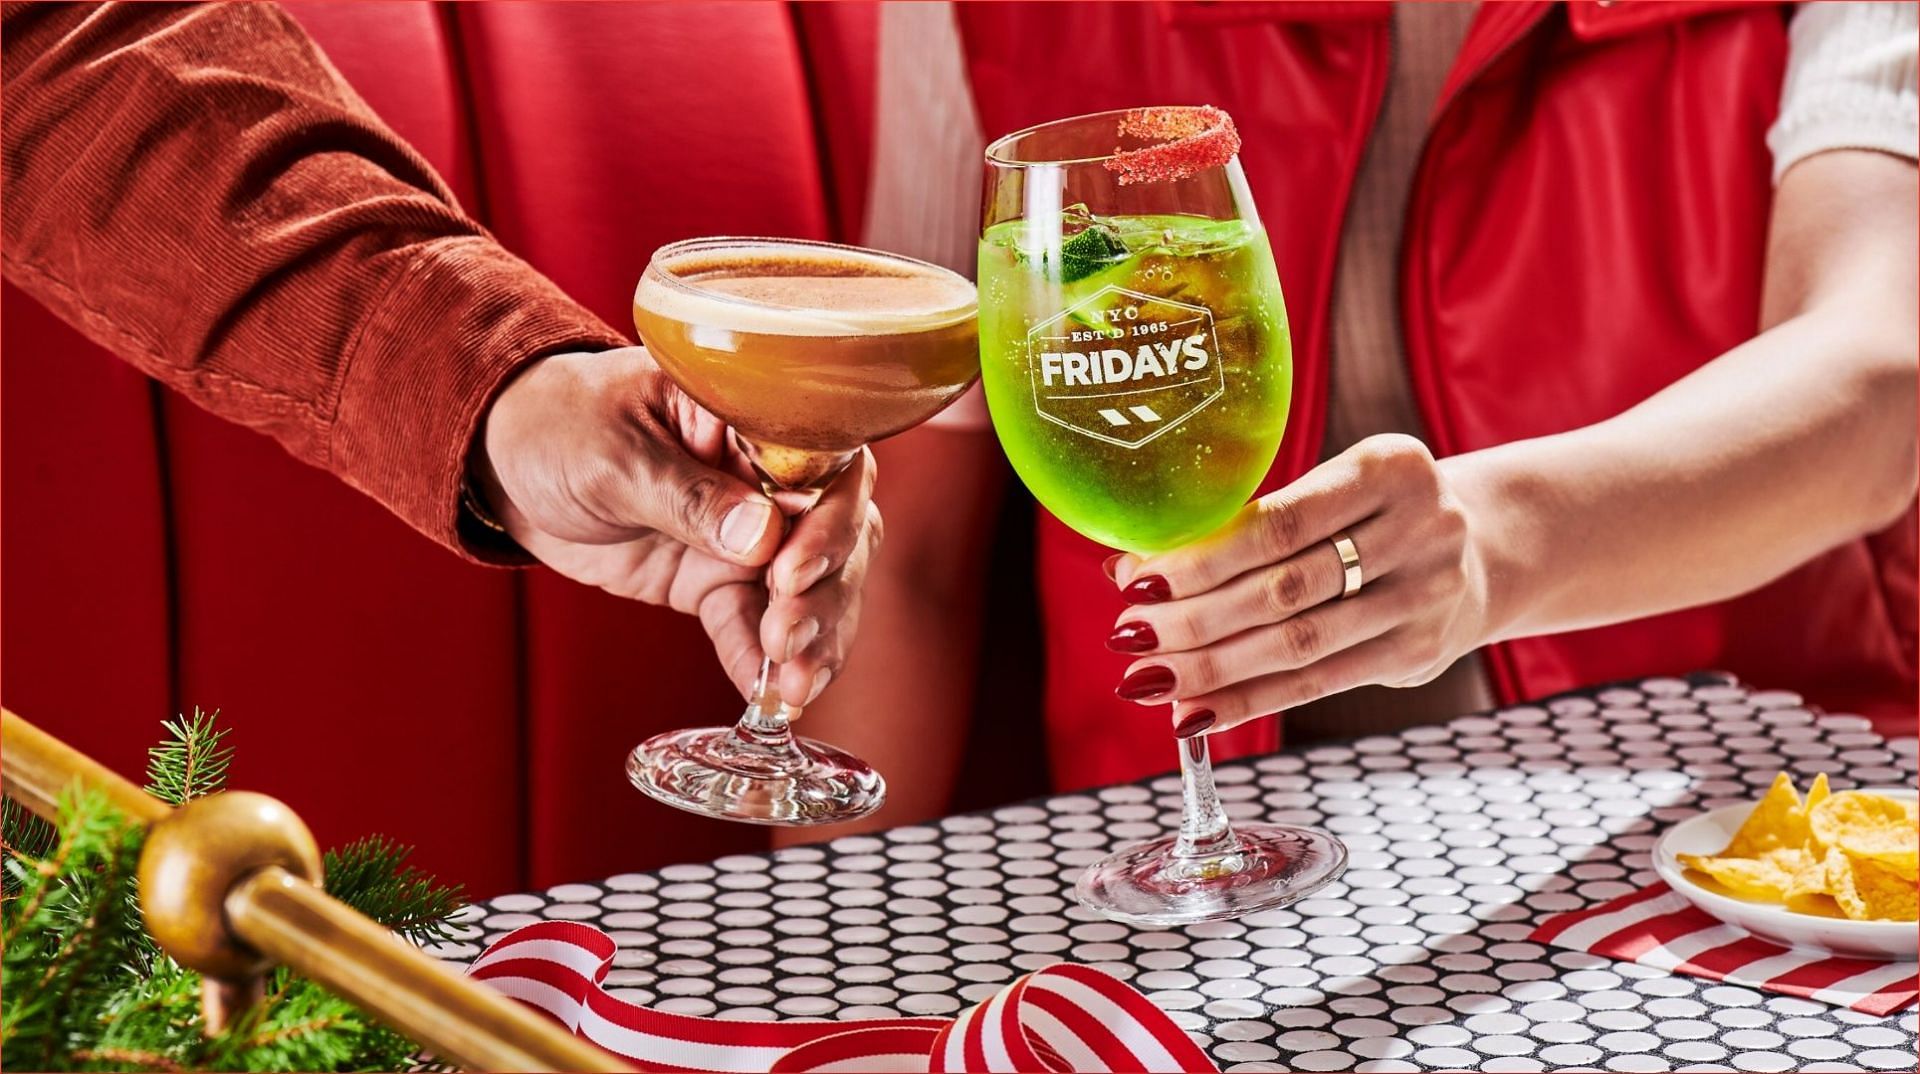 TGI Fridays&#039; Claus for Celebration holiday cocktail menu can be availed throughout the holiday season (Image via TGI Fridays)